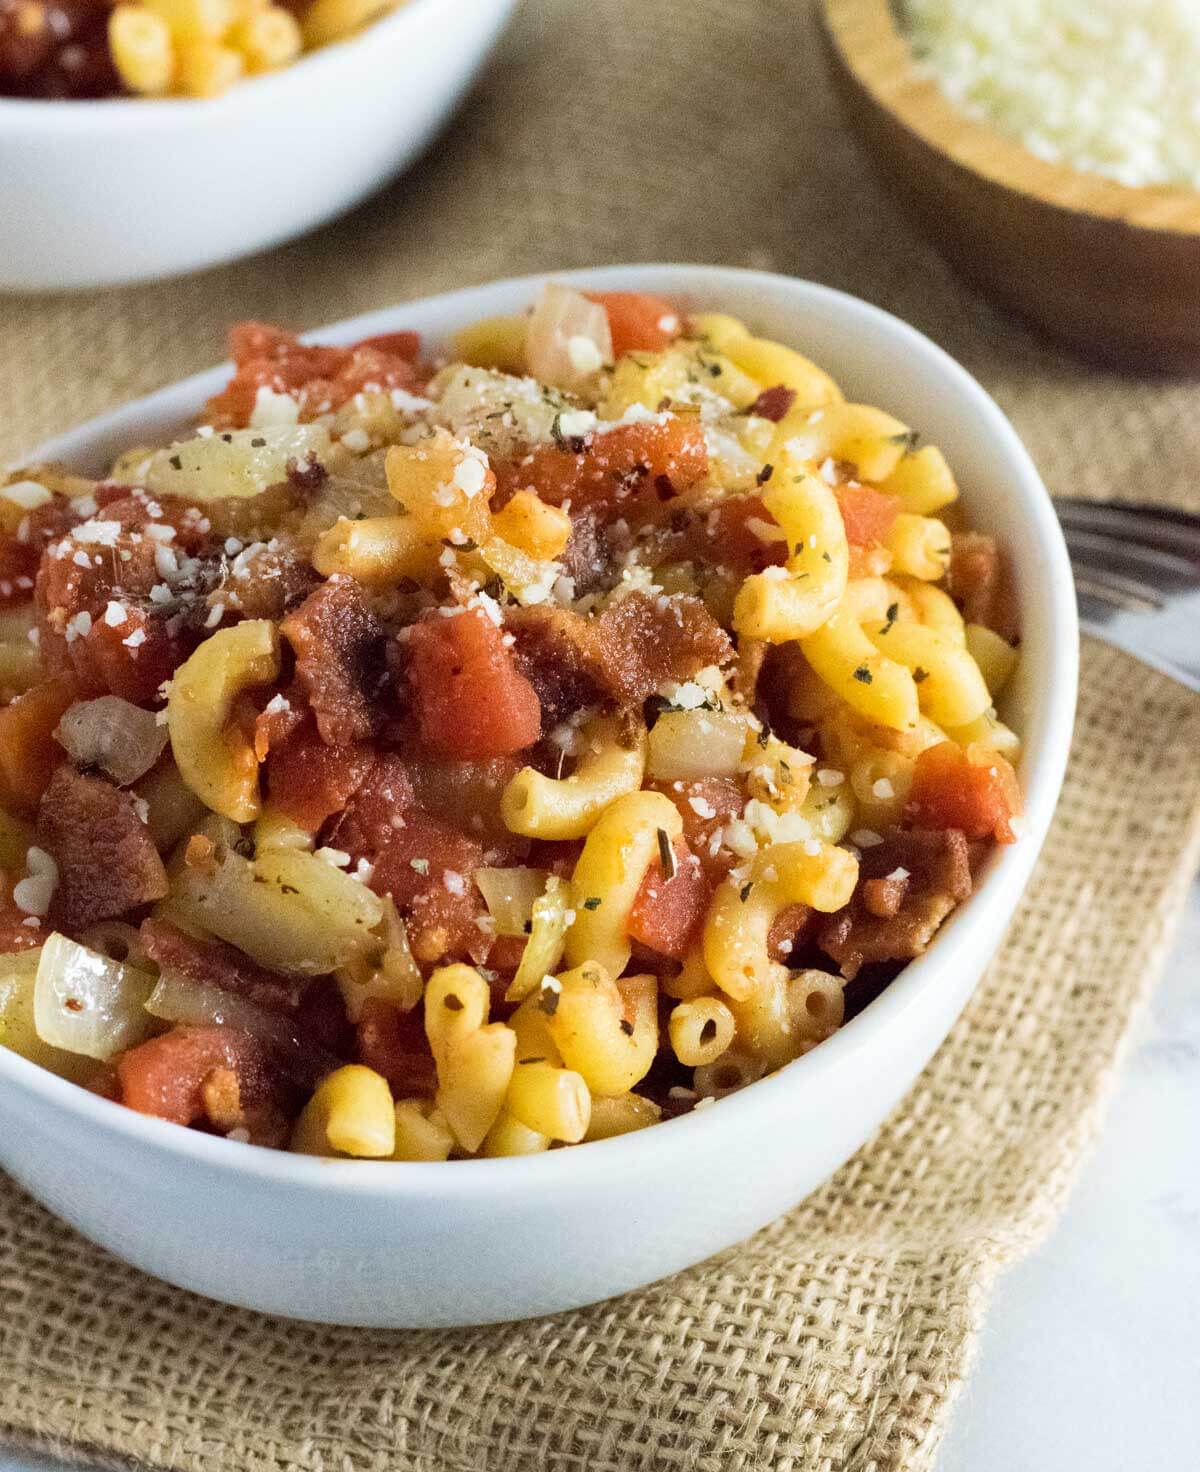 Macaroni and tomatoes in a bowl.